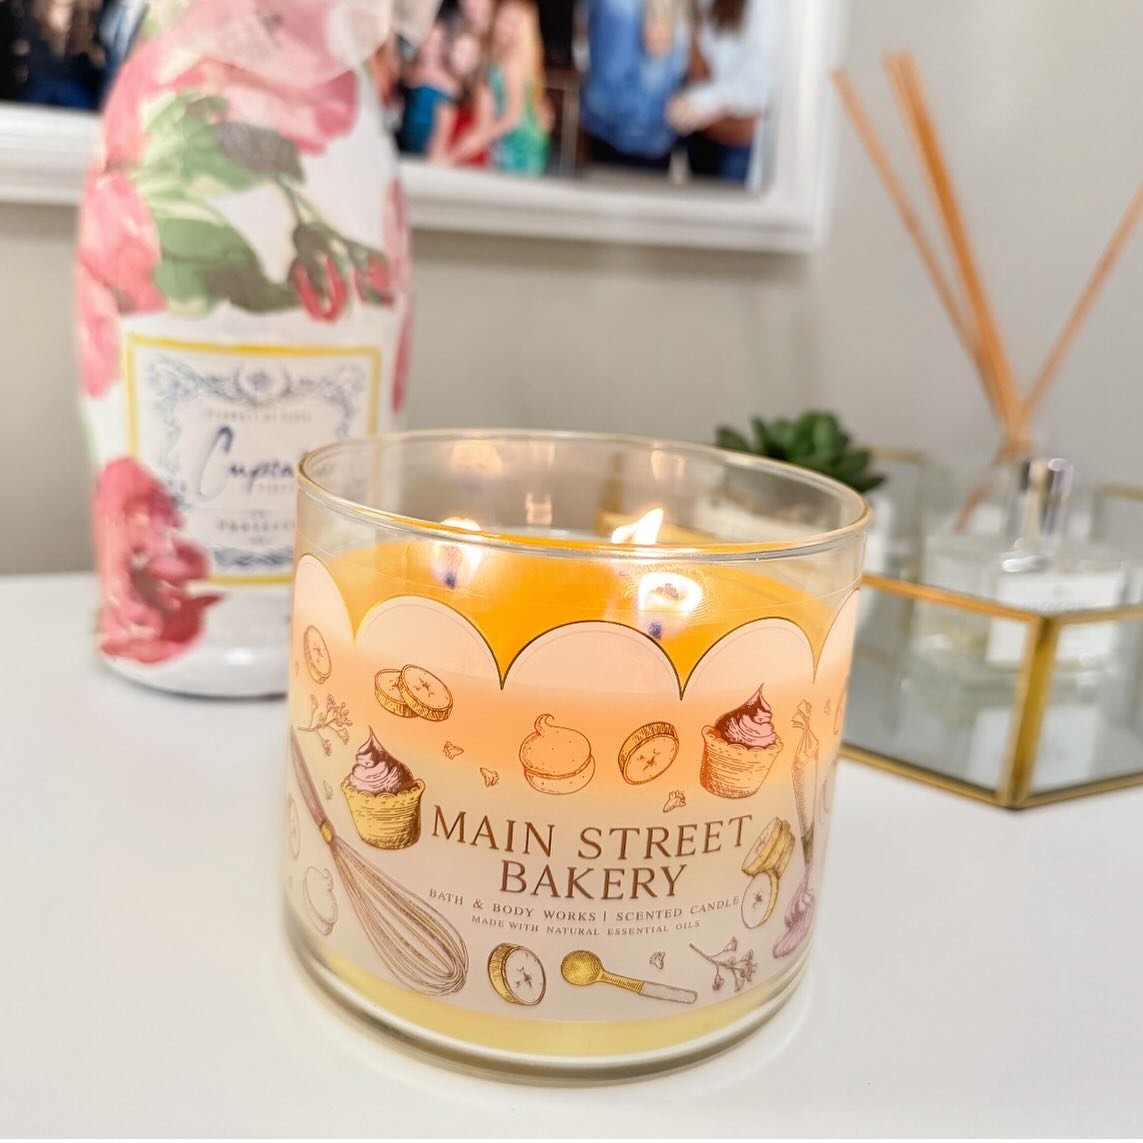 Perfect candle for this time of year🍰💗✨ 
-
Thought I&rsquo;d share a candle I&rsquo;ve been loving lately- @bathandbodyworks Main Street Bakery! I love warm, sweet scents, but they don&rsquo;t always scream spring/summer&hellip; this candle is the 